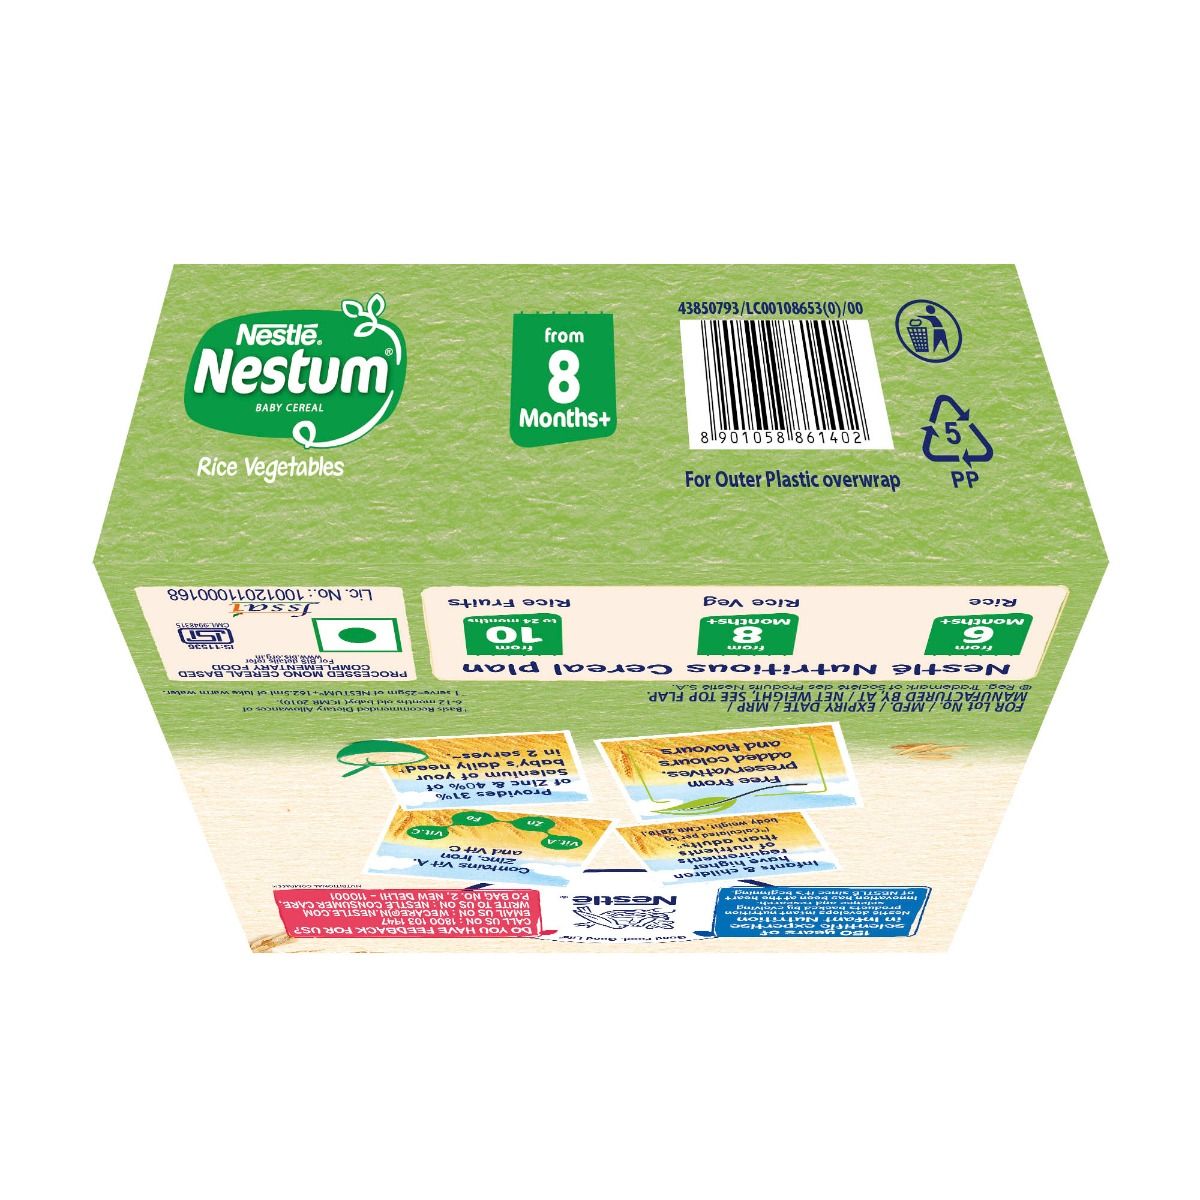 Nestle Nestum Baby Cereal Rice Vegetables (From 8 Months+) Powder, 300 gm Refill Pack, Pack of 1 